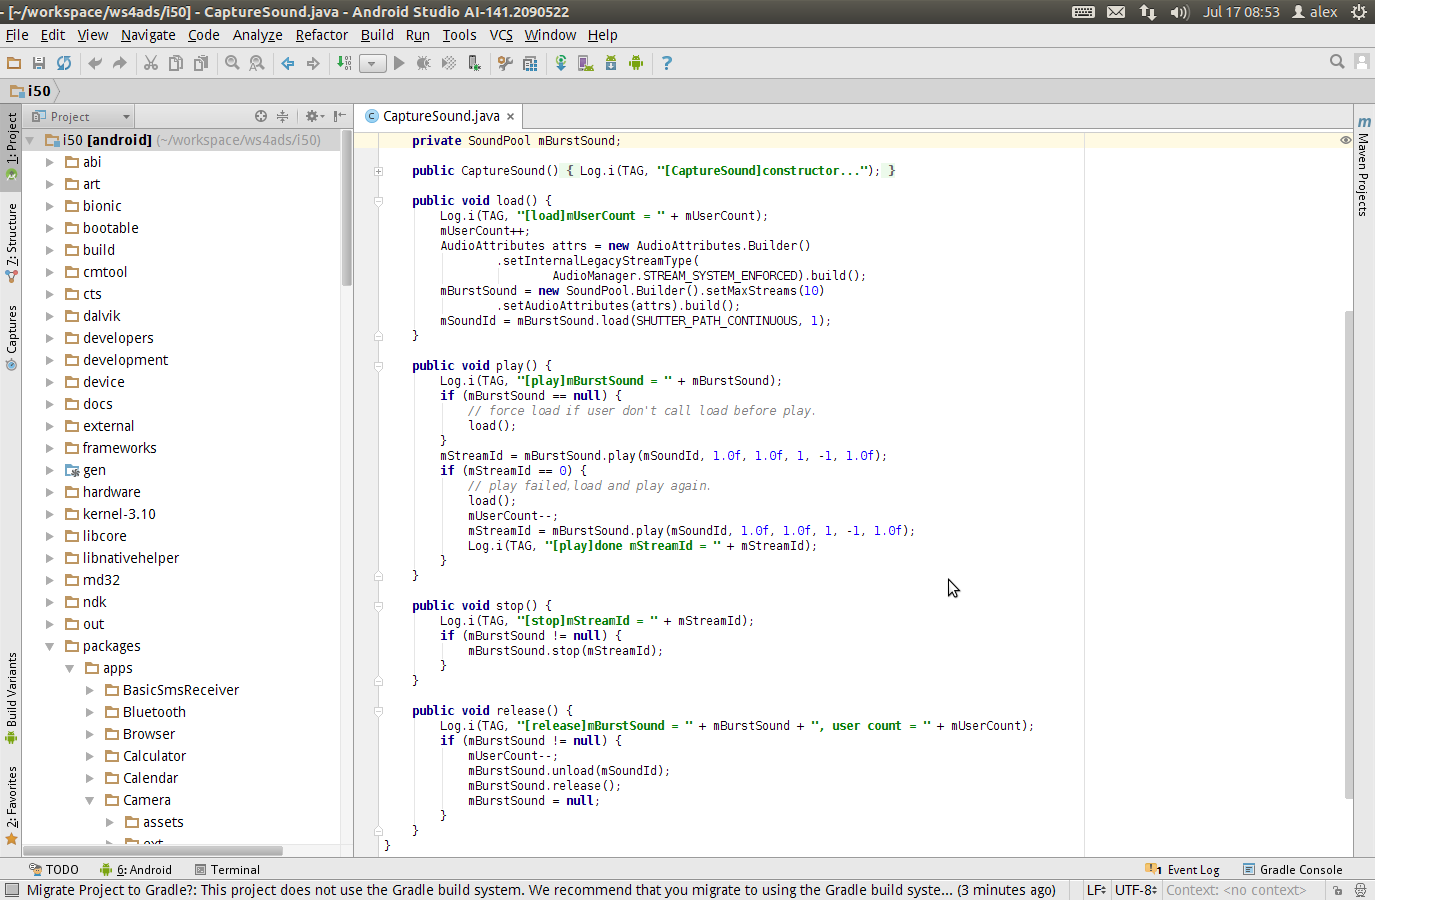 Lollipop with Android studio